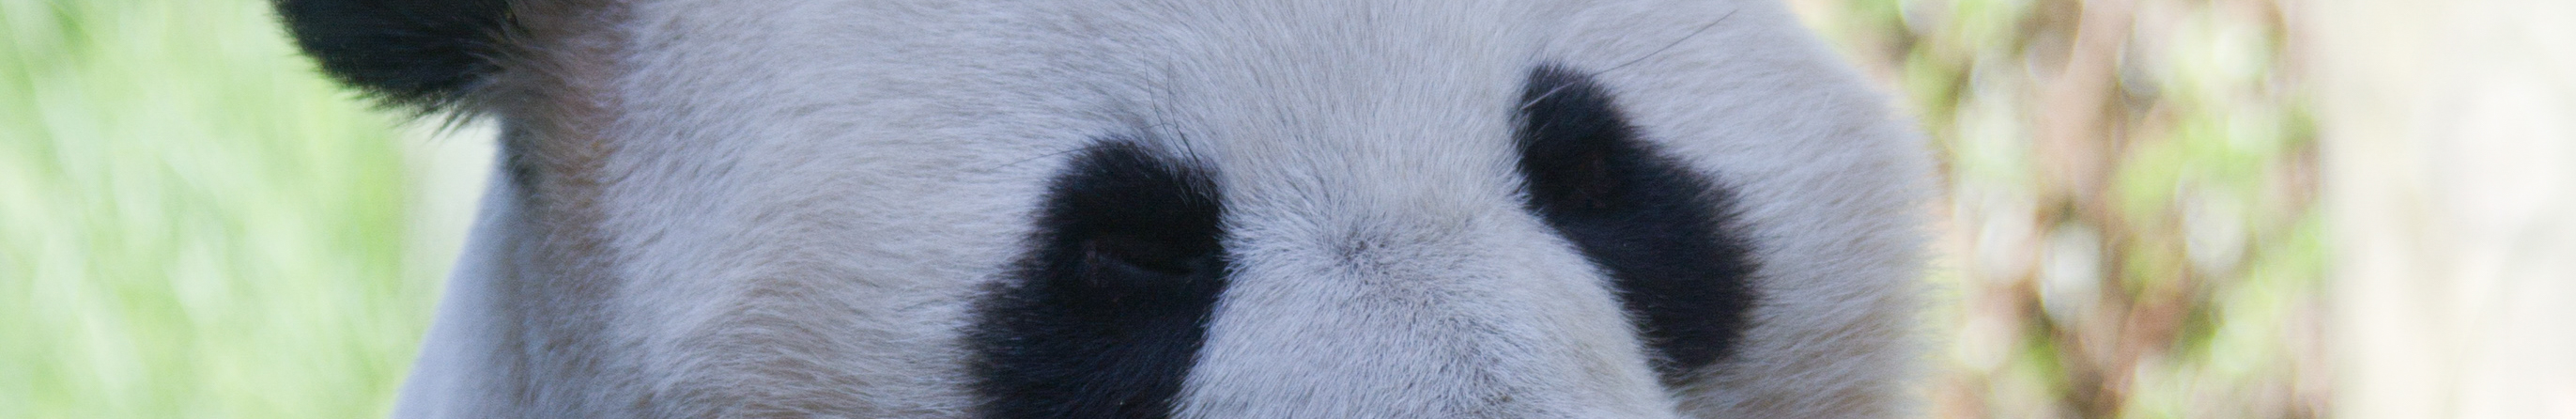 A giant panda zoomed into their eyes and ears